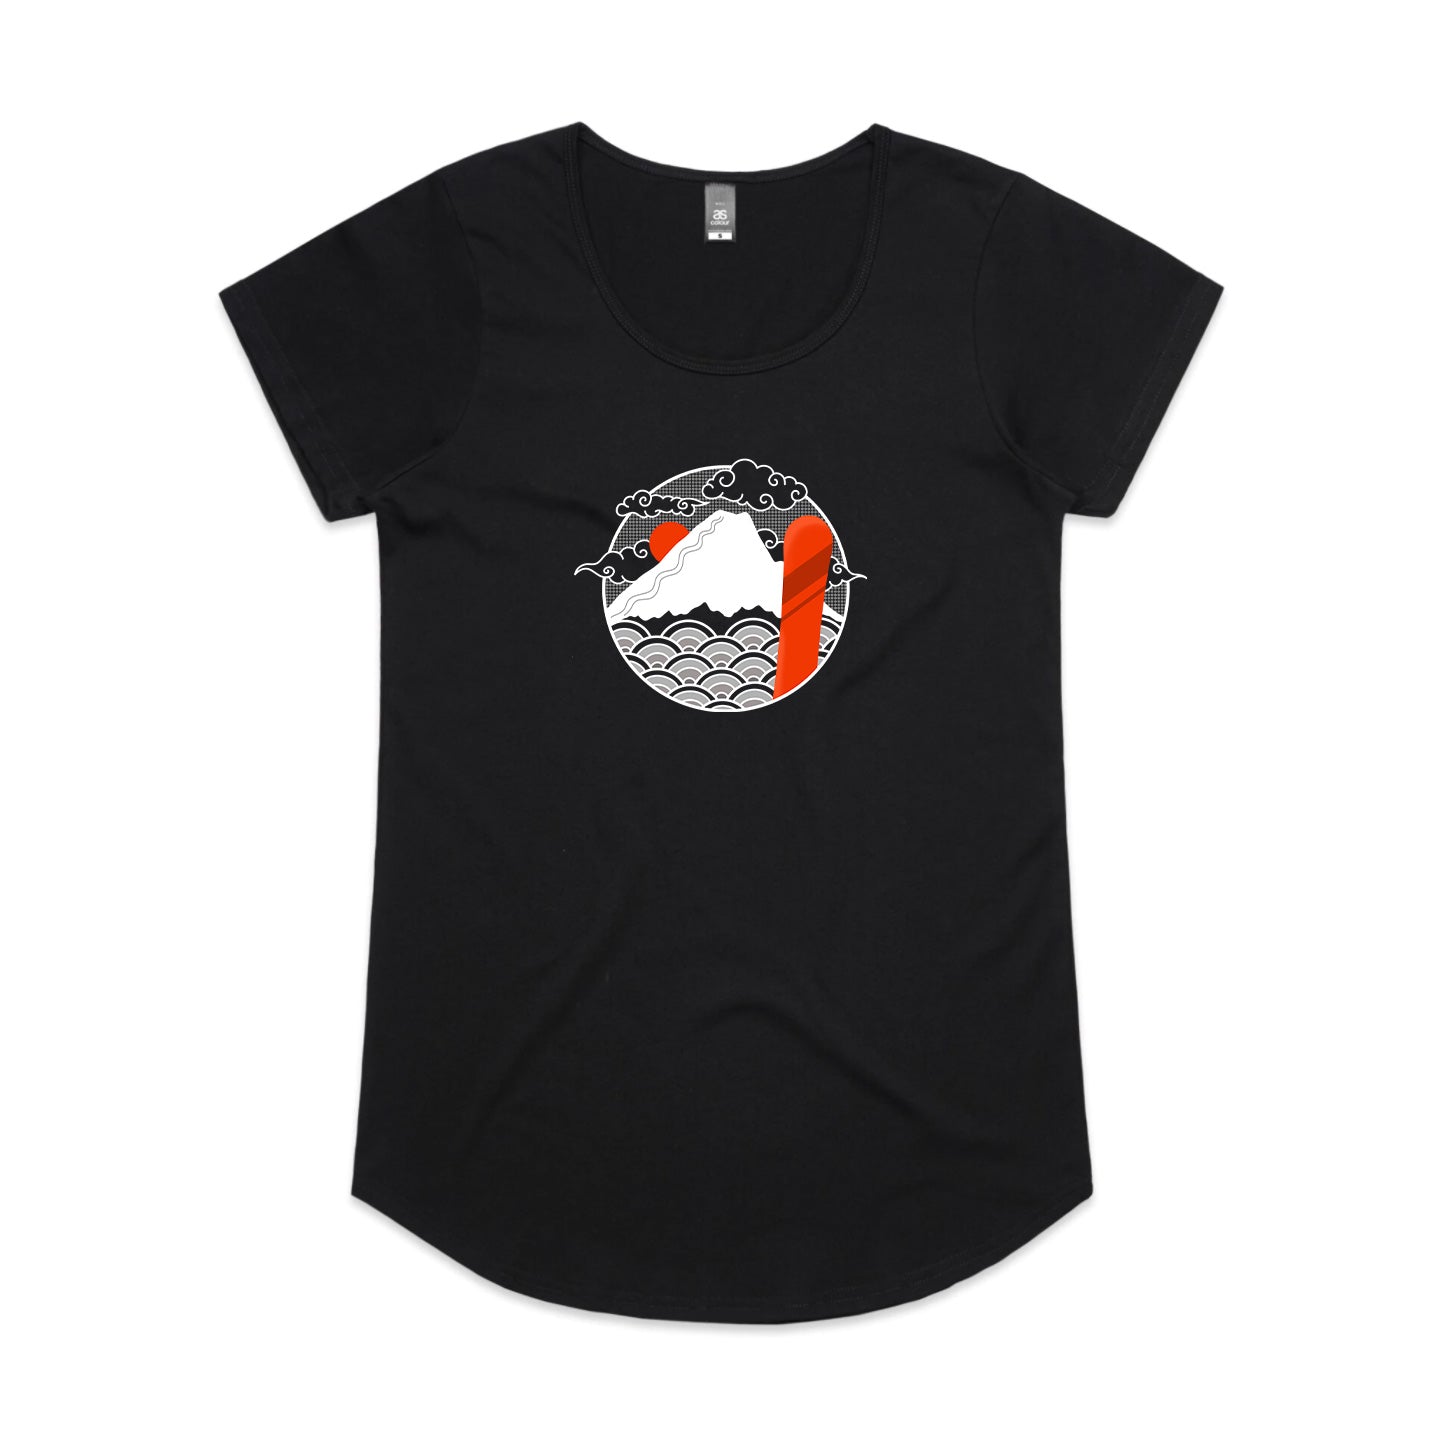 Women's Land of Japow SHRED Tee - No Text